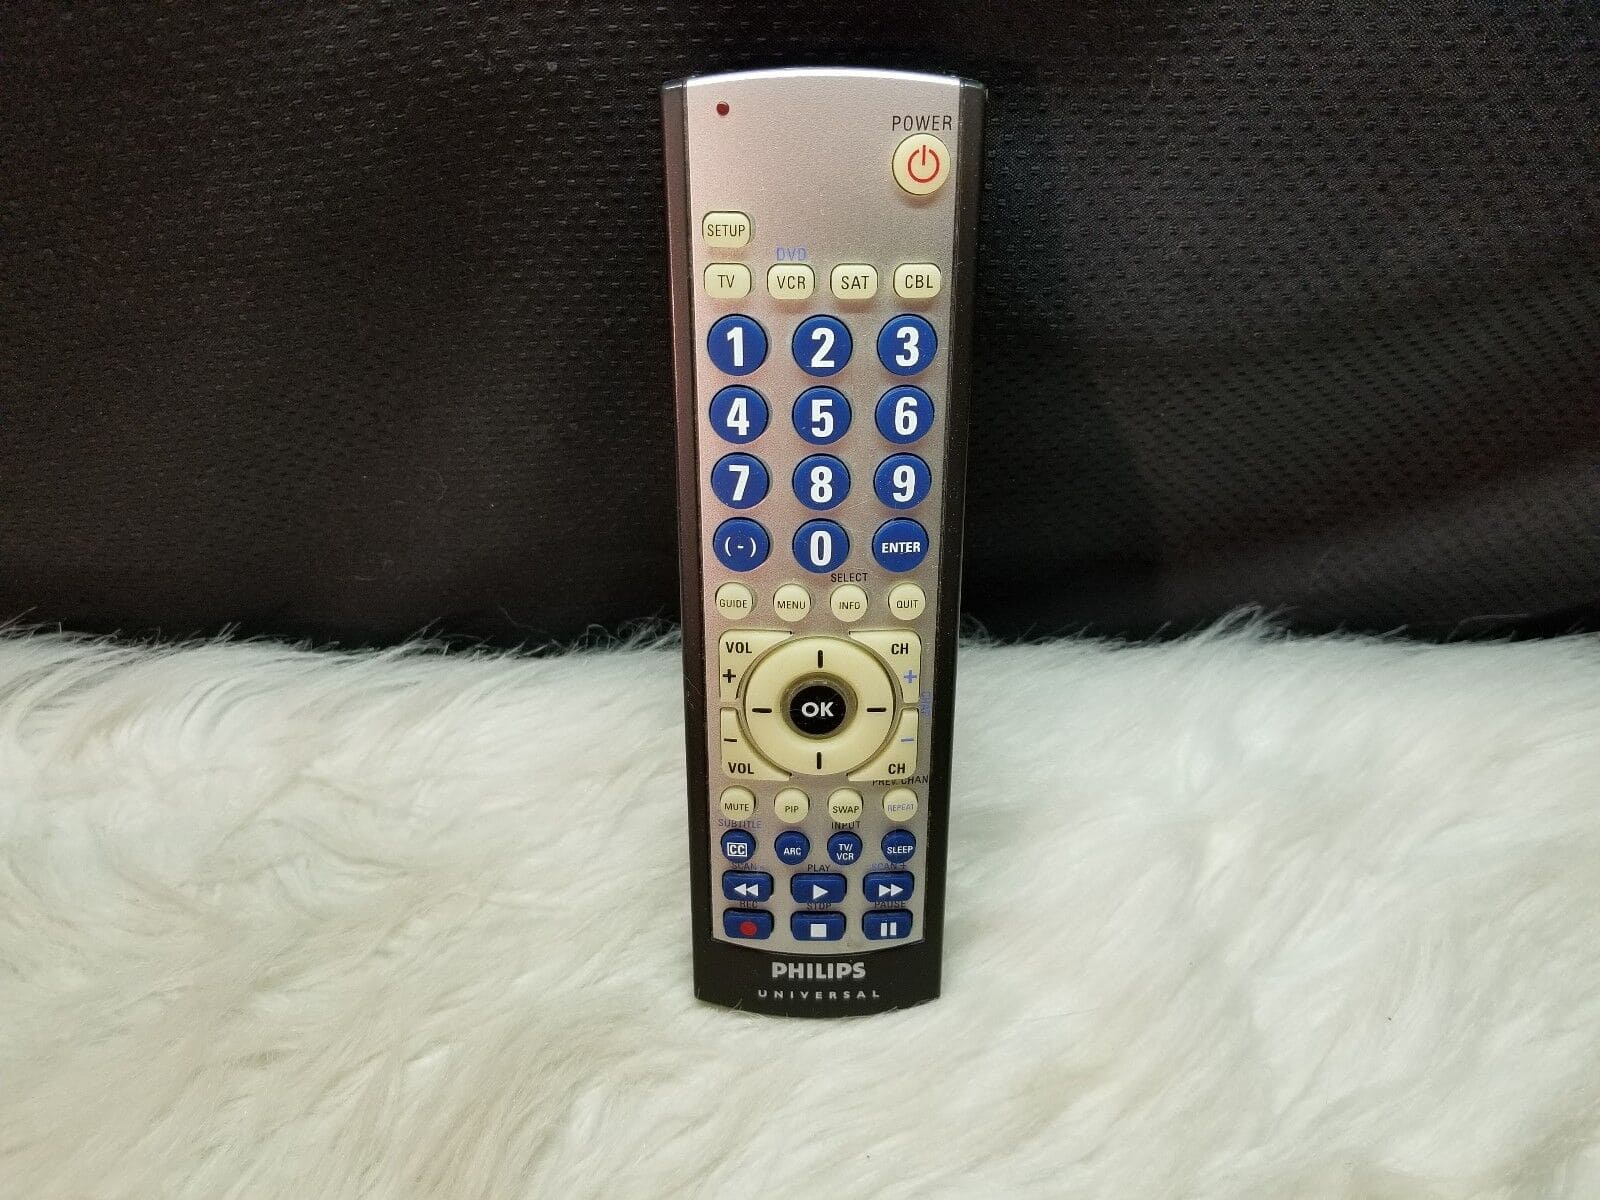 How Do I Program A Philips Universal Remote Without A Code?